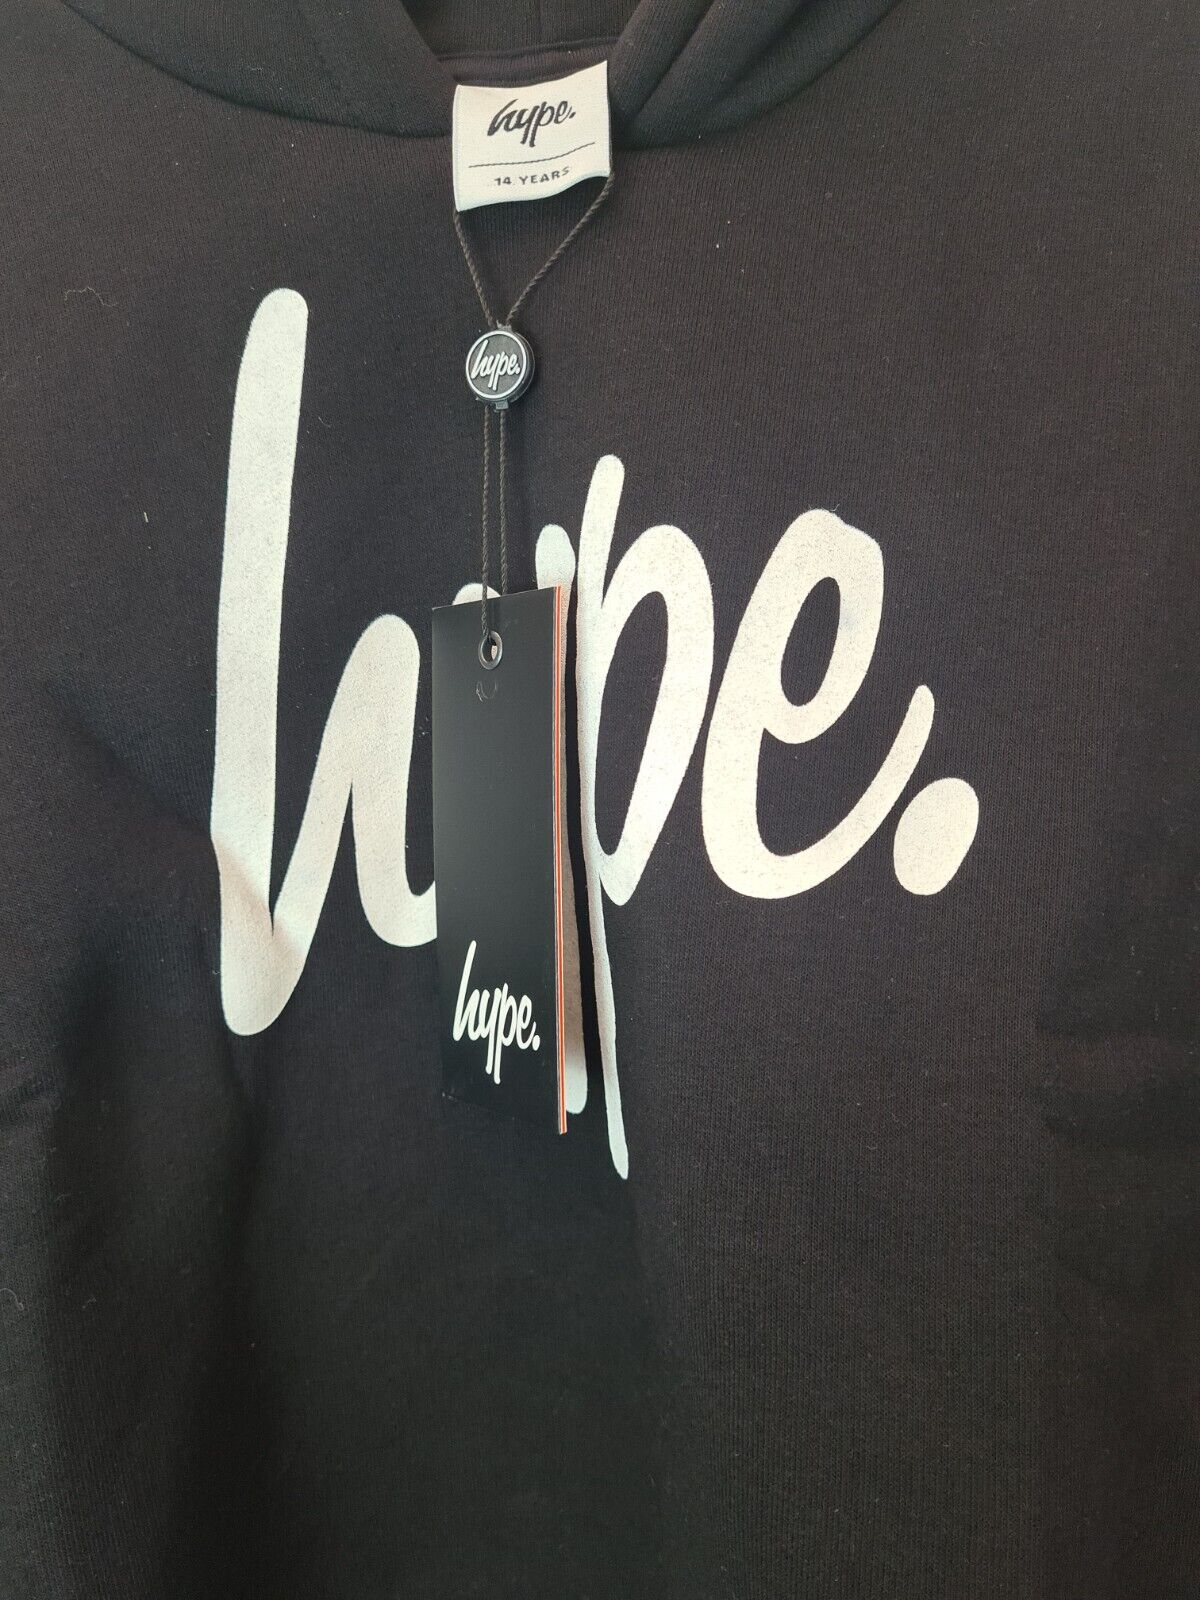 Hype Girls Black Cropped Script Hoodie Size 14 Years **** V30R